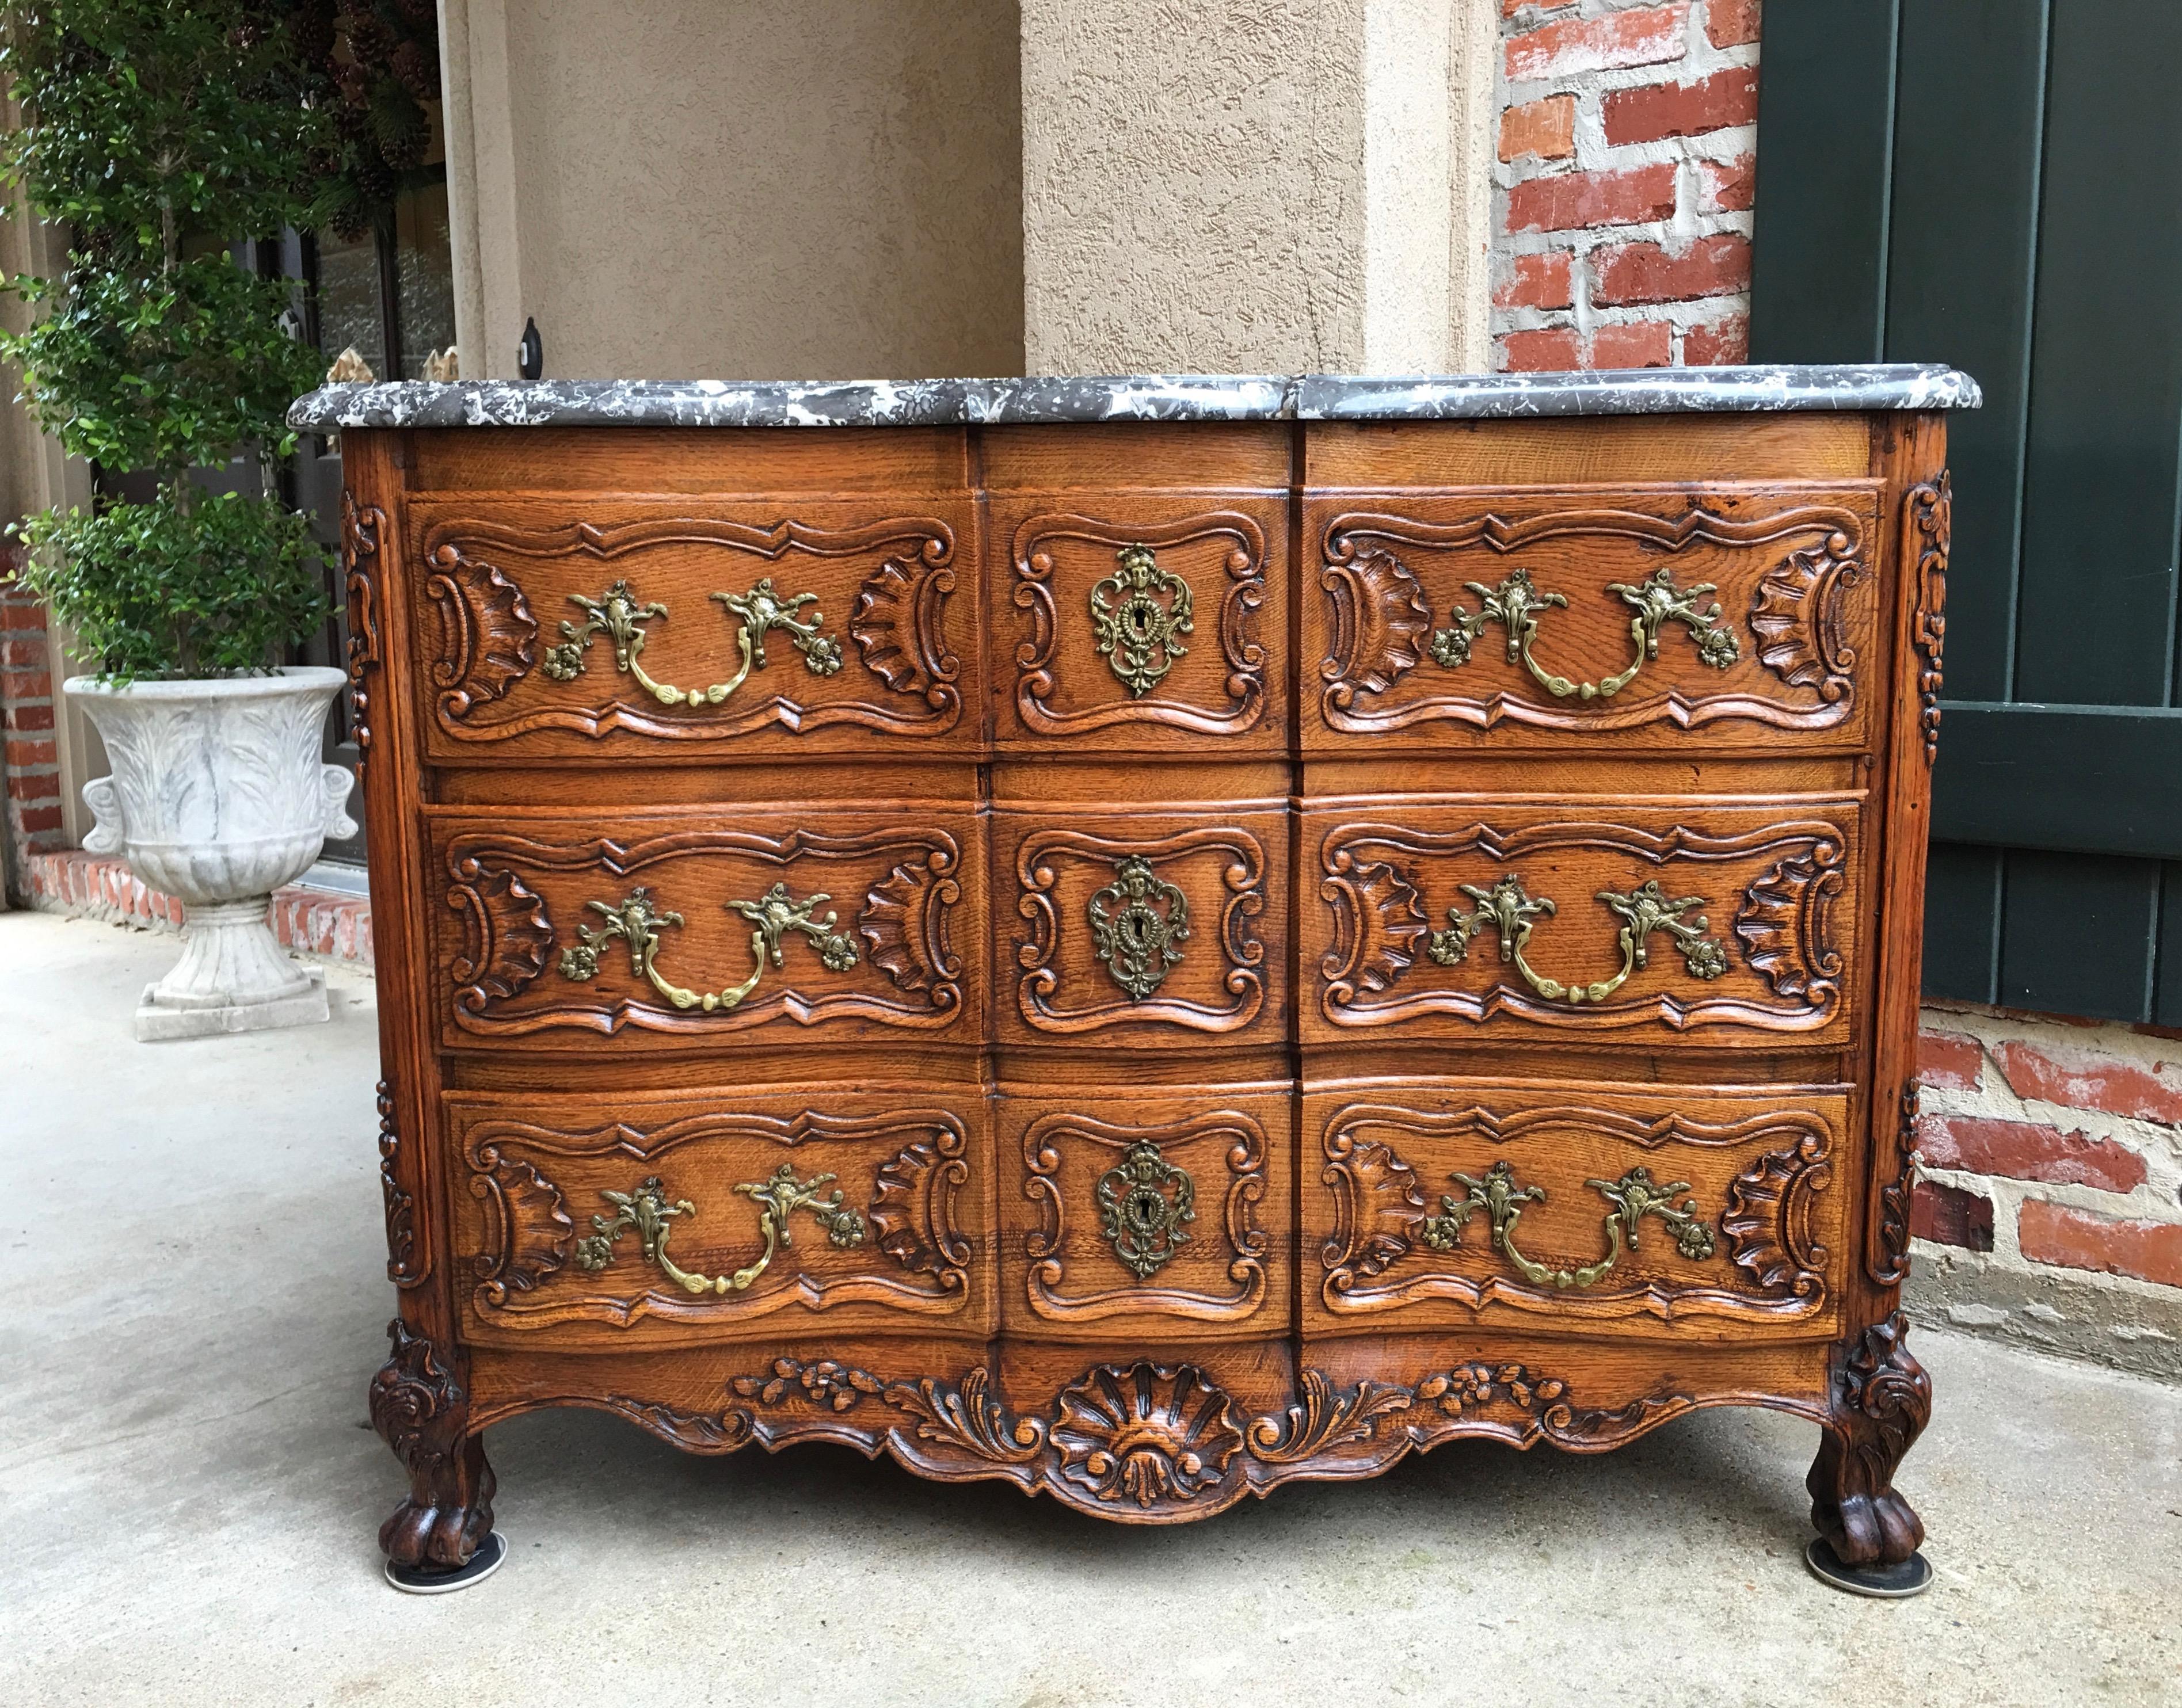 Direct from France, a large antique French chest or side table, in stunning Louis XV style!
~Serpentine shaped front and serpentine beveled marble top
~Massive carvings across the entire drawer fronts with exquisite shell design in lower carving